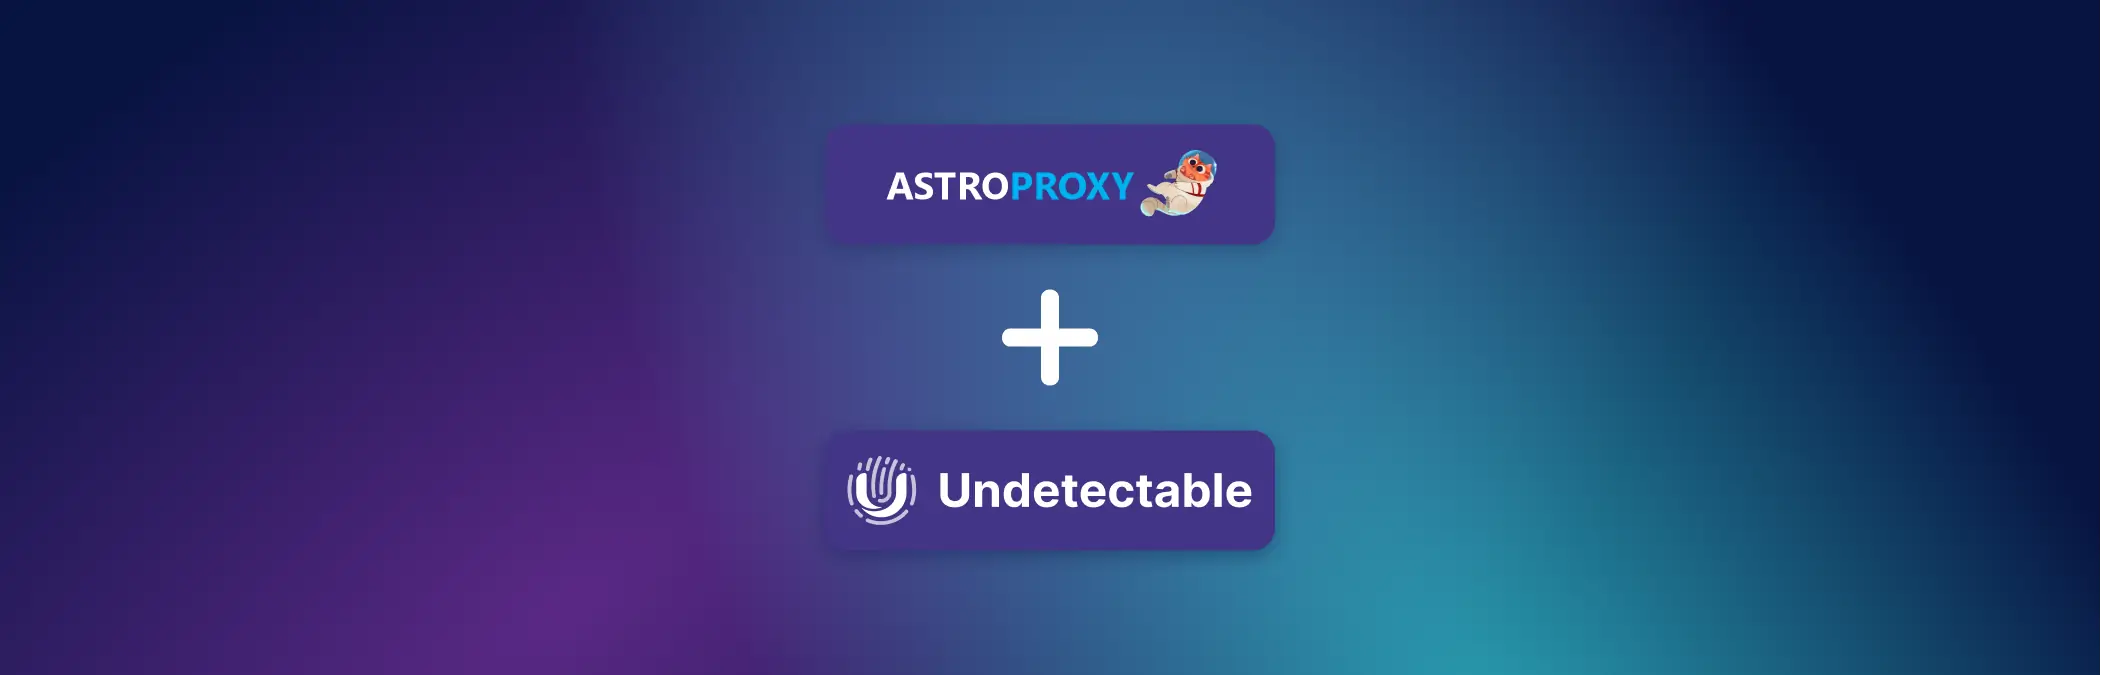 Cách sử dụng AstroProxy với Undetectable